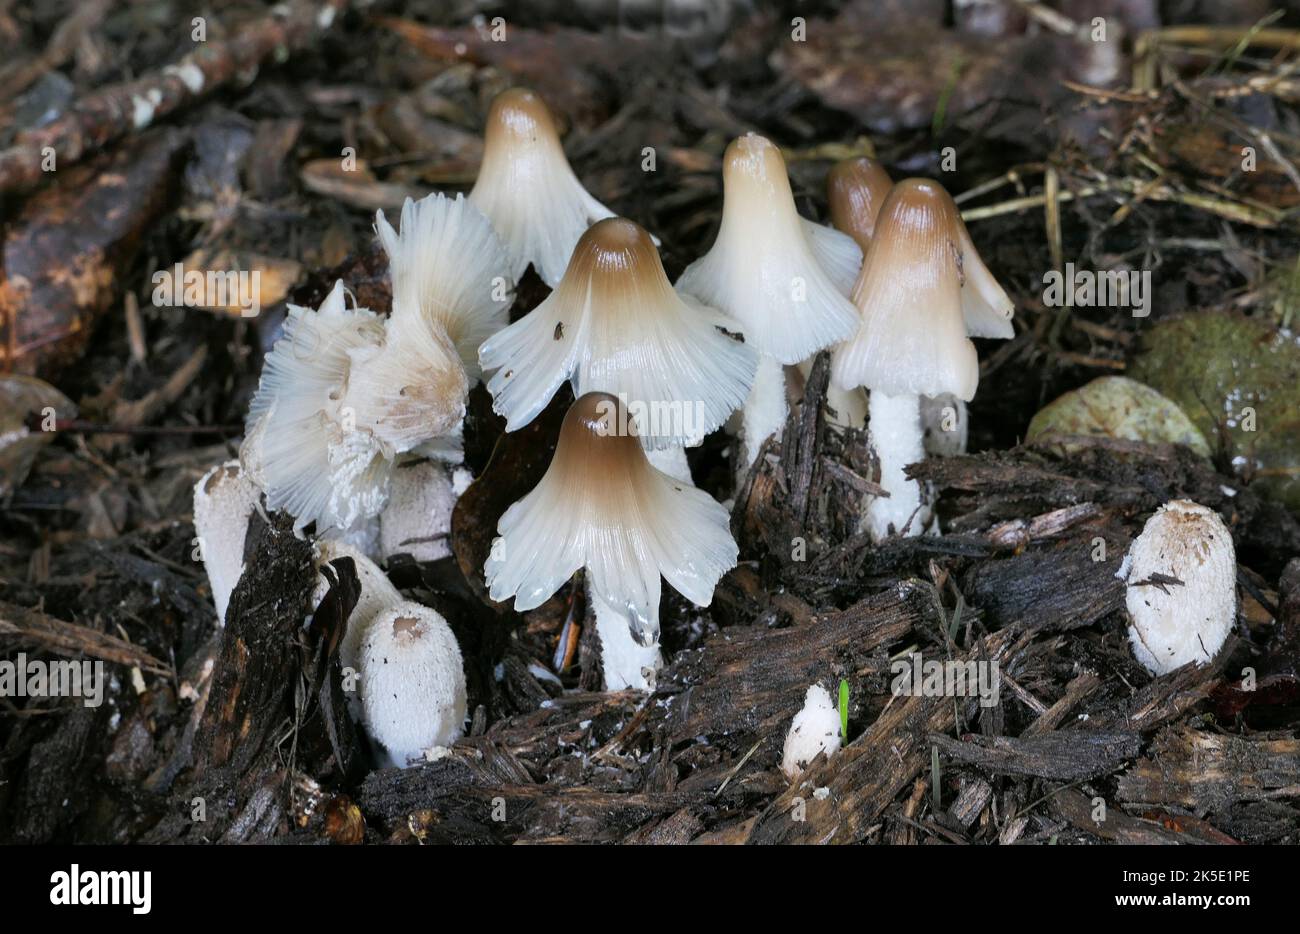 Likely Coprinopsis atramentaria, commonly known as the common ink cap or inky cap, is an edible mushroom found in Europe and North America. Previously known as Coprinus atramentarius, it is the second best known ink cap and previous member of the genus Coprinus after C. comatus. Credit: BSpragg Stock Photo